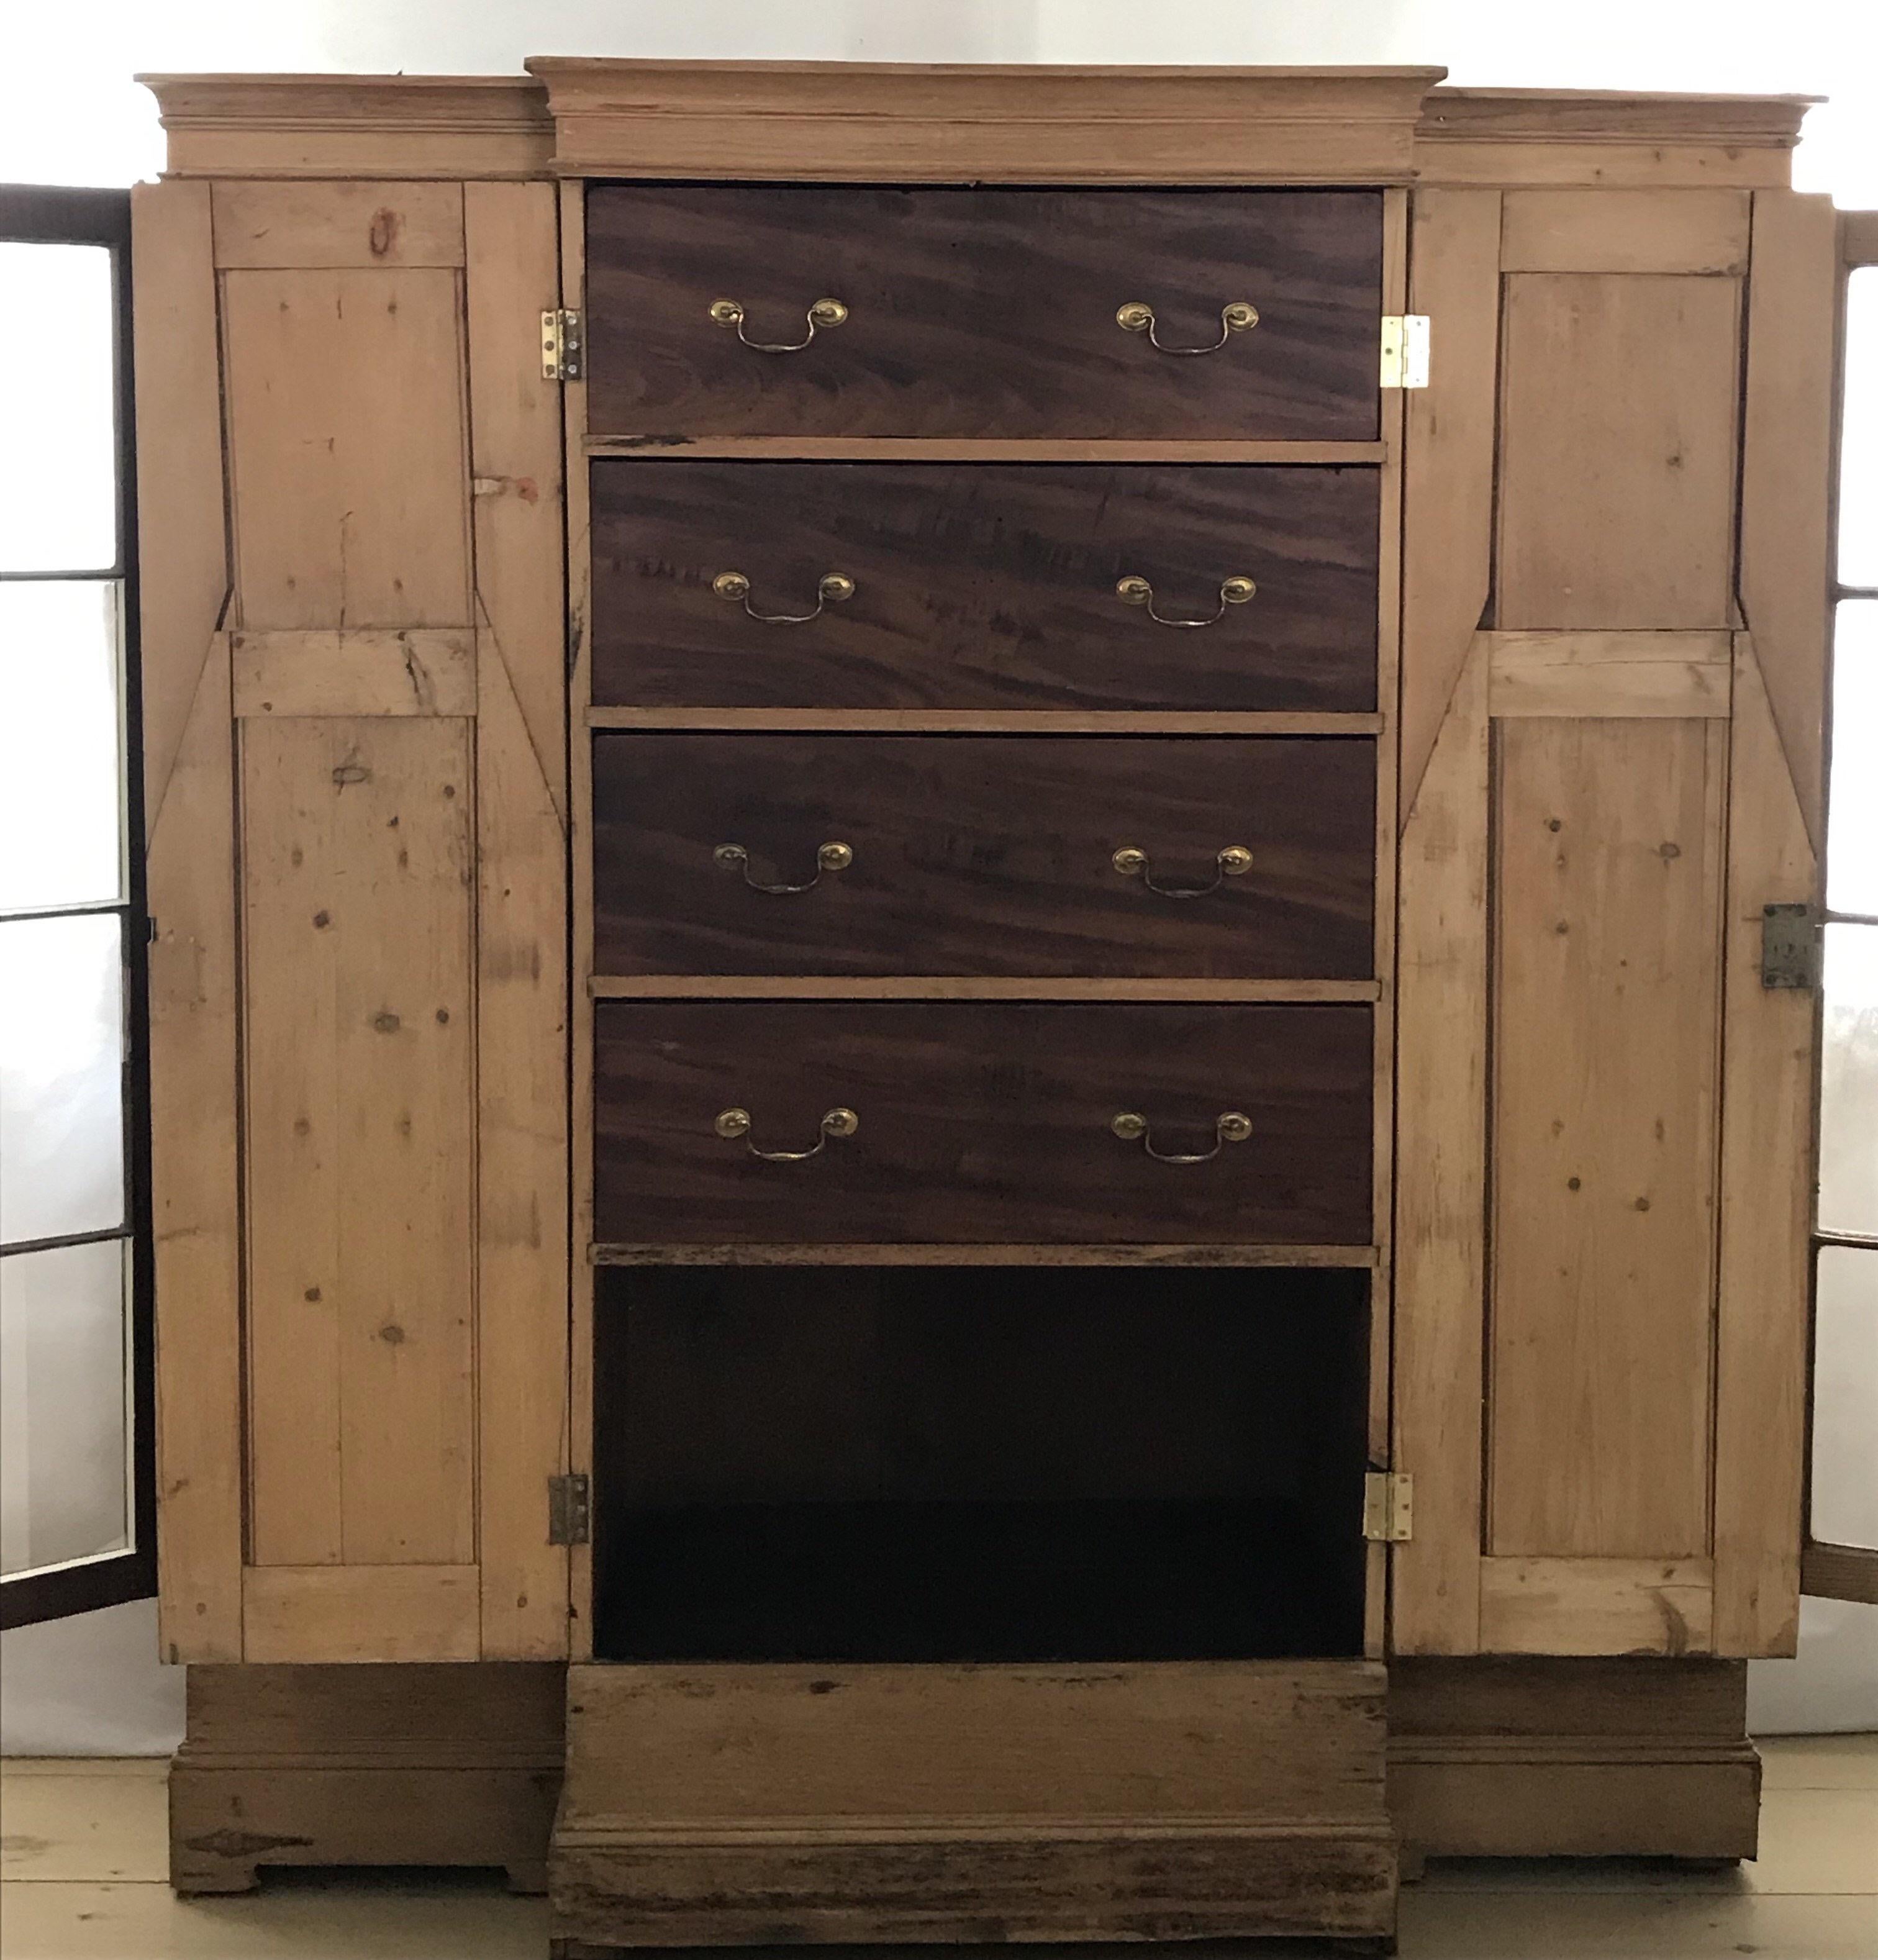 Superb quality early 19th century pine Scottish solicitors cabinet armoire having a base section with four beautifully faux painted drawers over an open shelf behind two doors, with separate side sections that house eight shelves for books. This